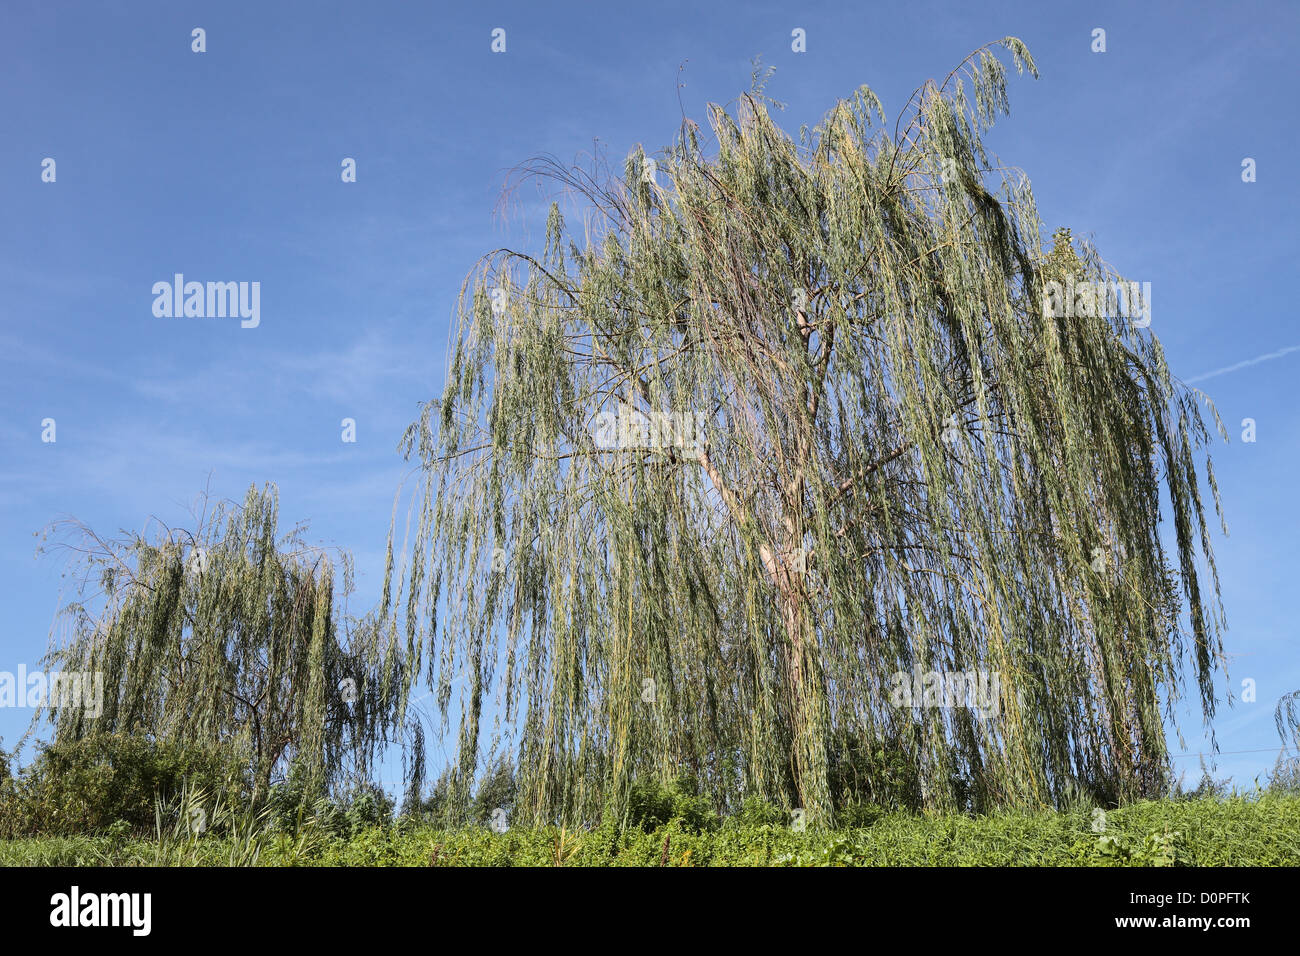 Forest of weeping willows Stock Photo